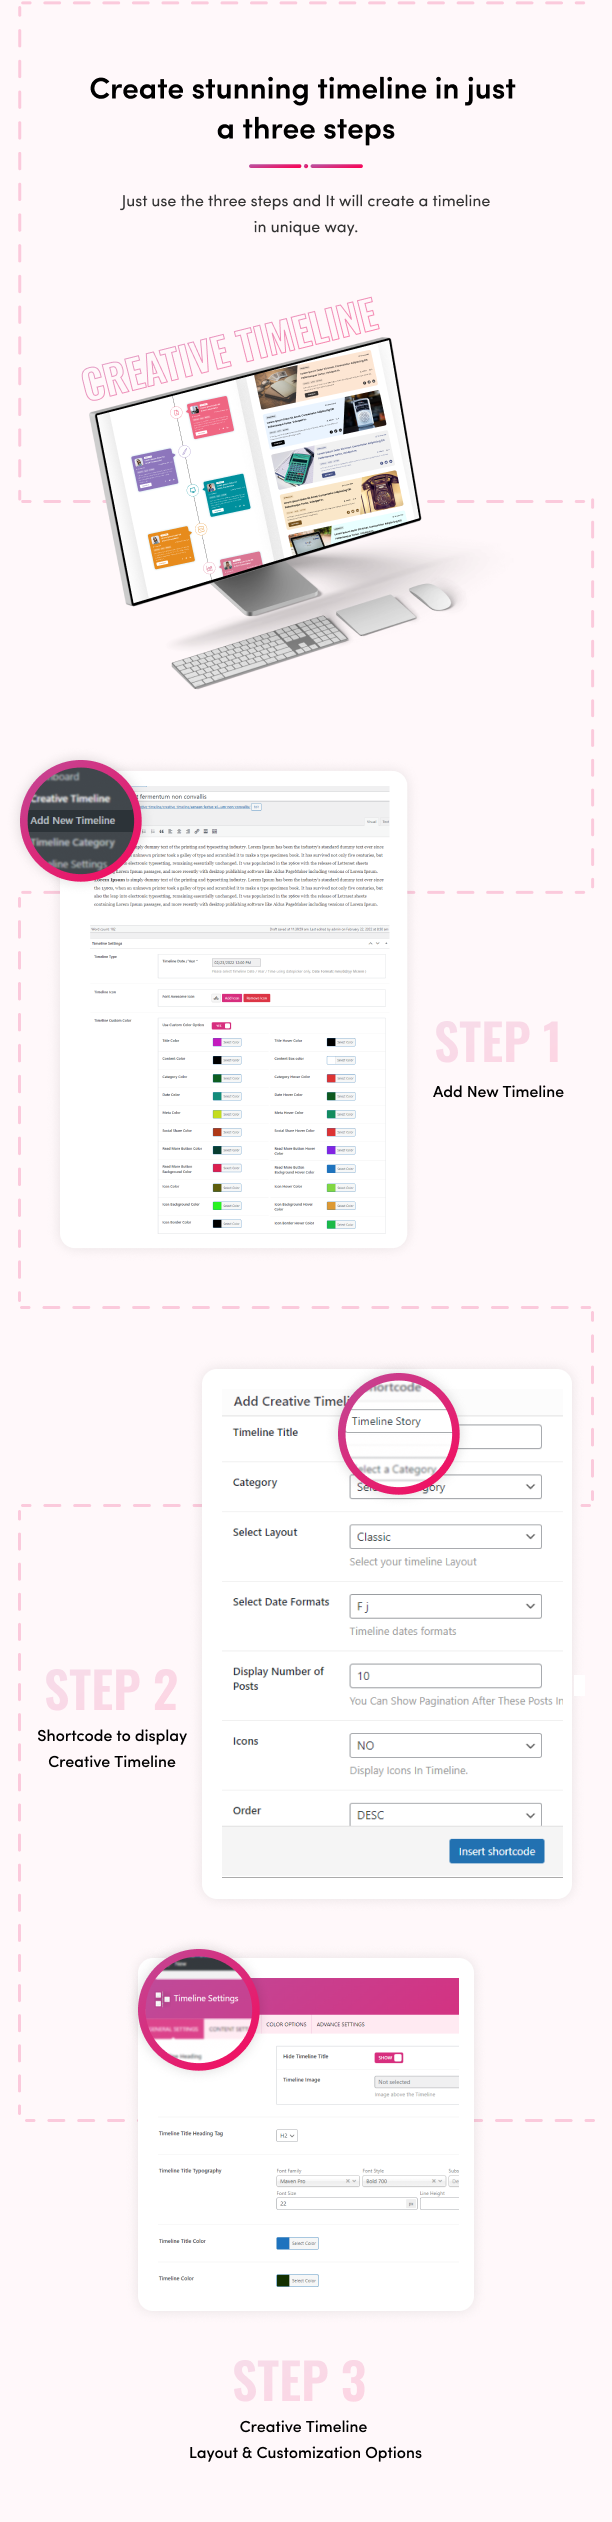 Create stunning timeline in just a three steps